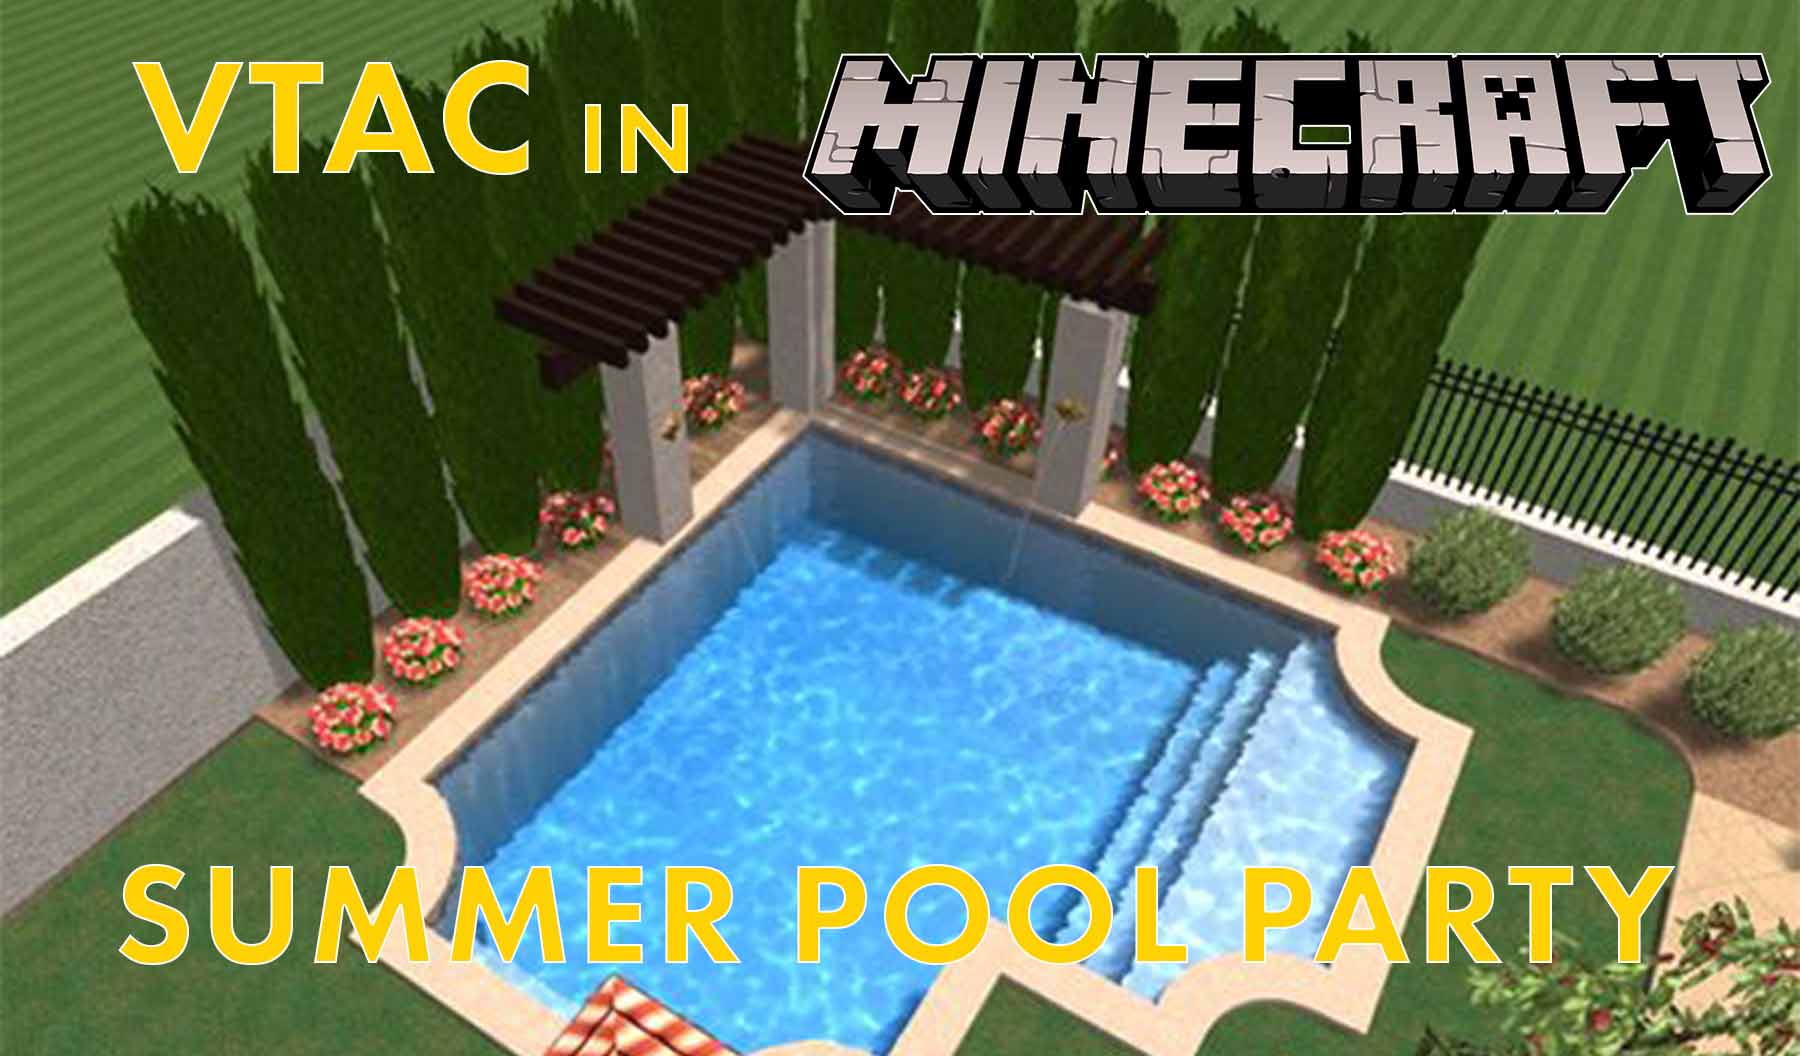 Summer Pool Party - VTAC in Minecraft